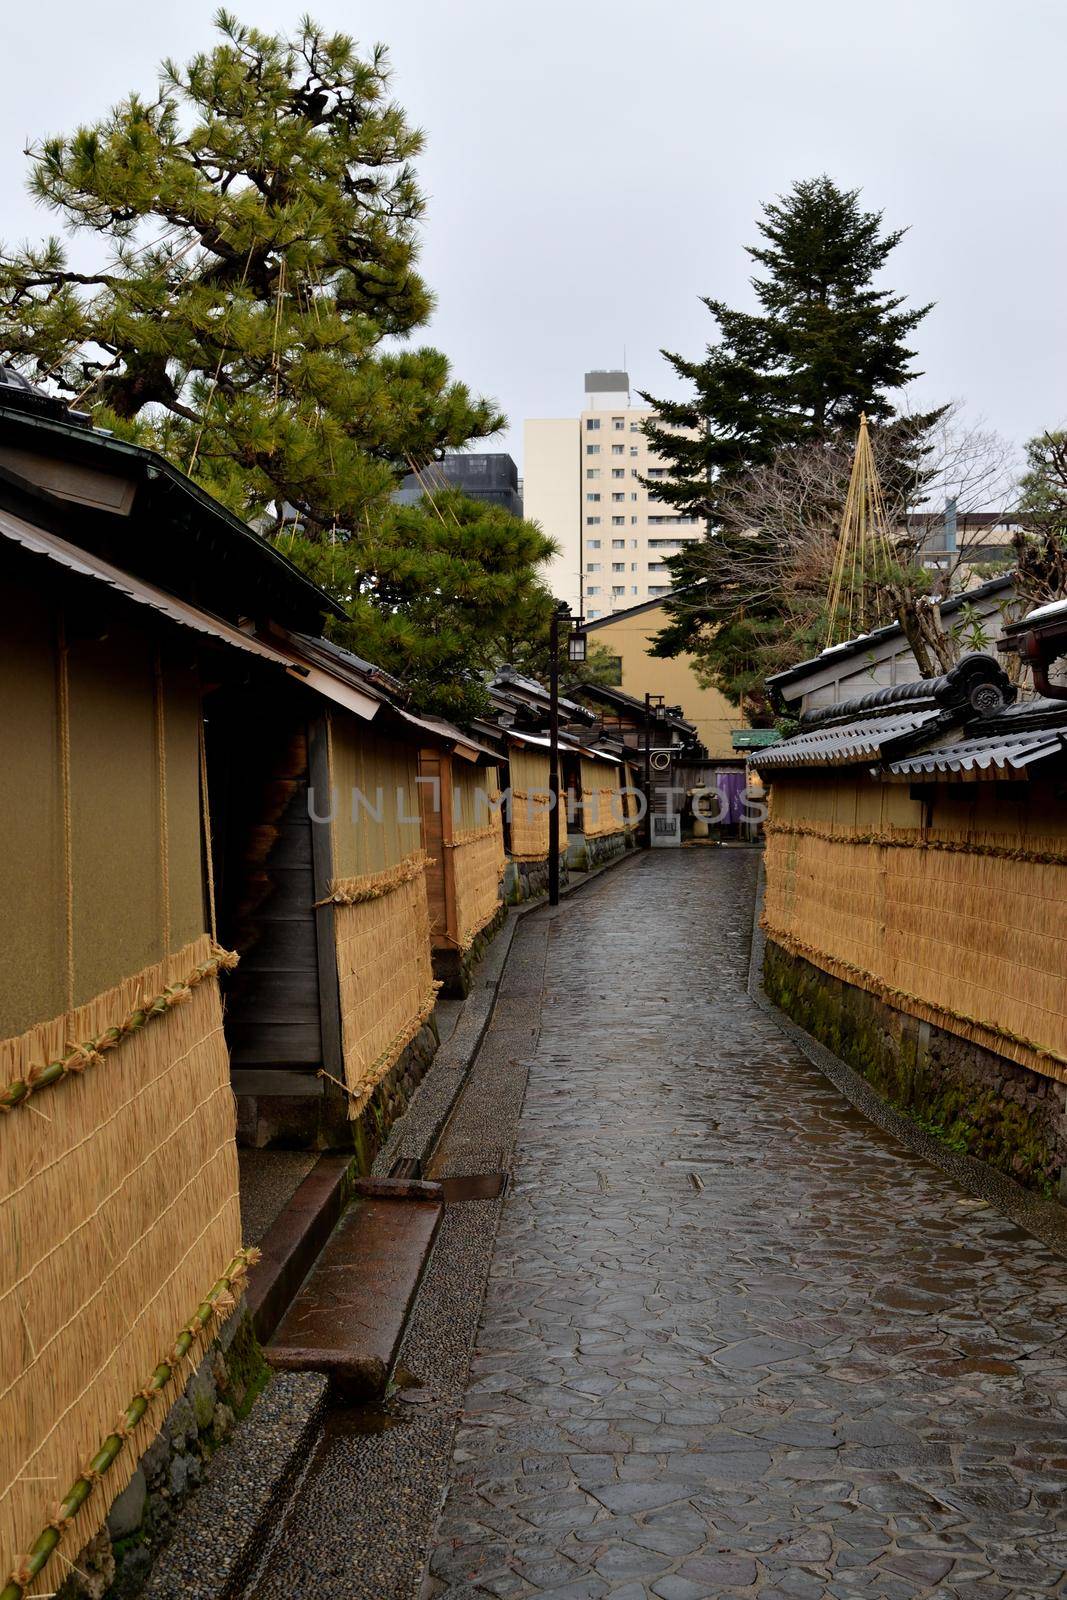 View of a alley in the samurai district, Kanazawa, Japan